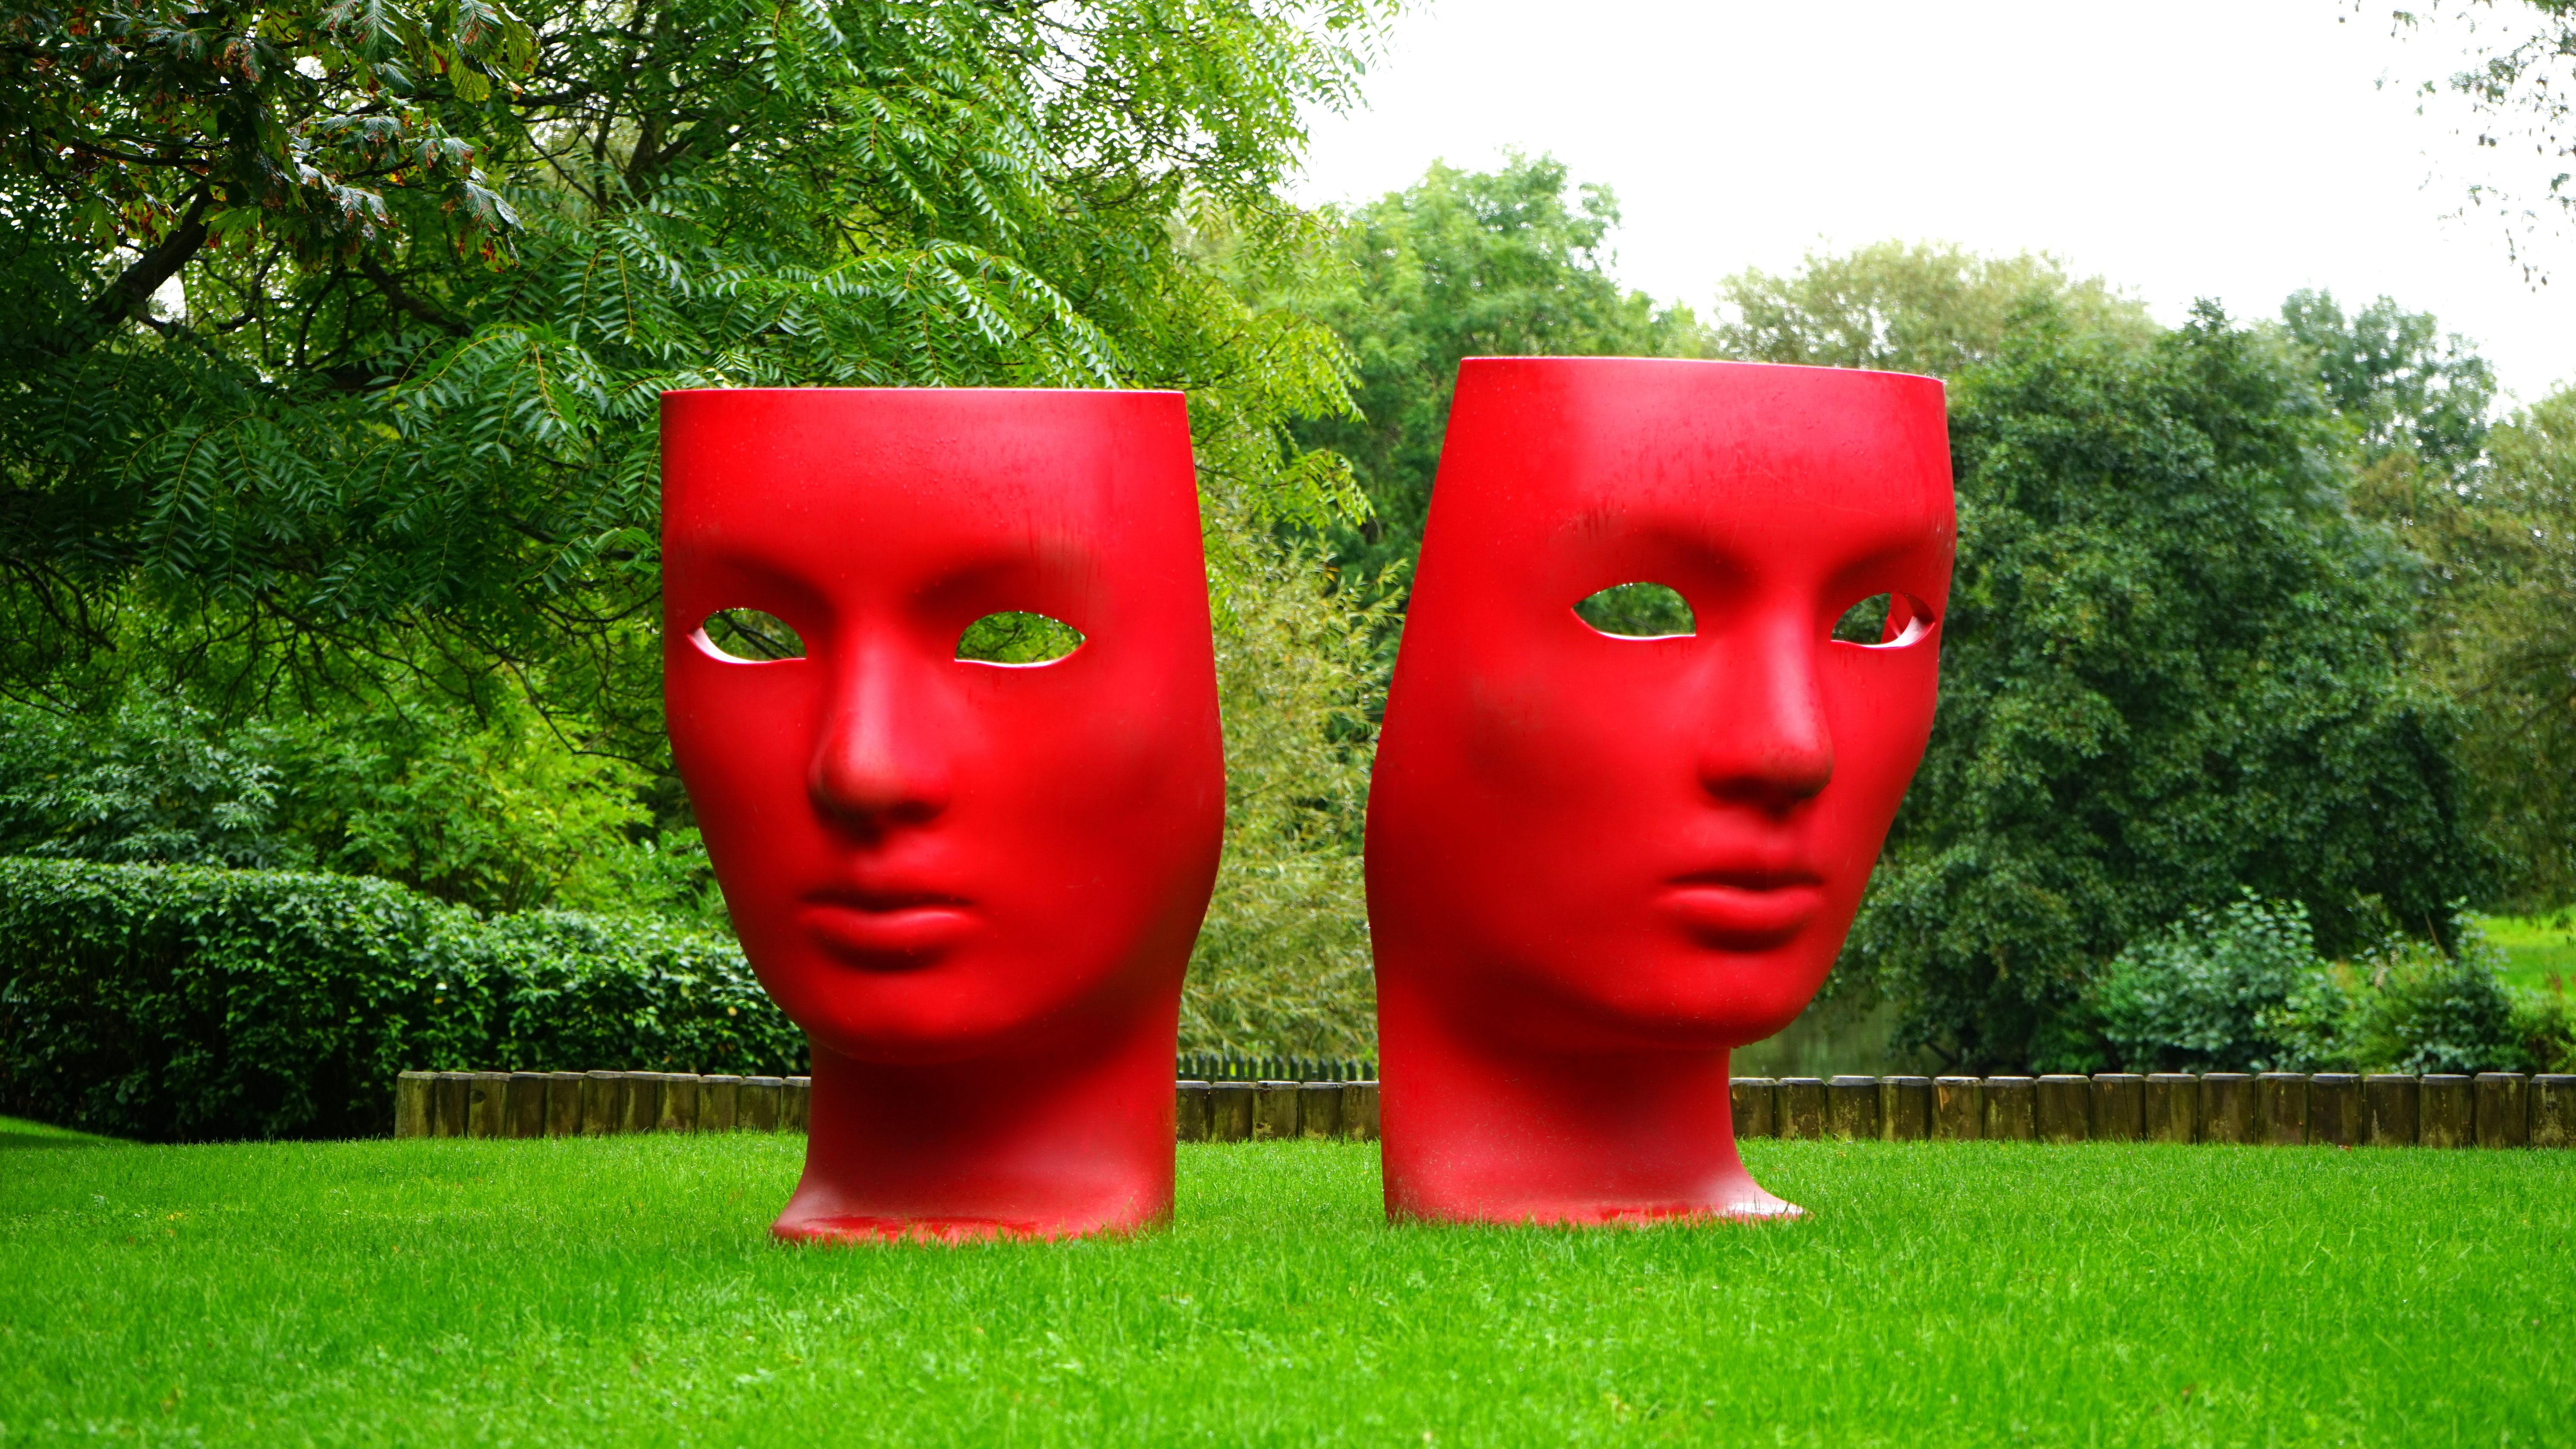 Red human face monument on green grass field photo